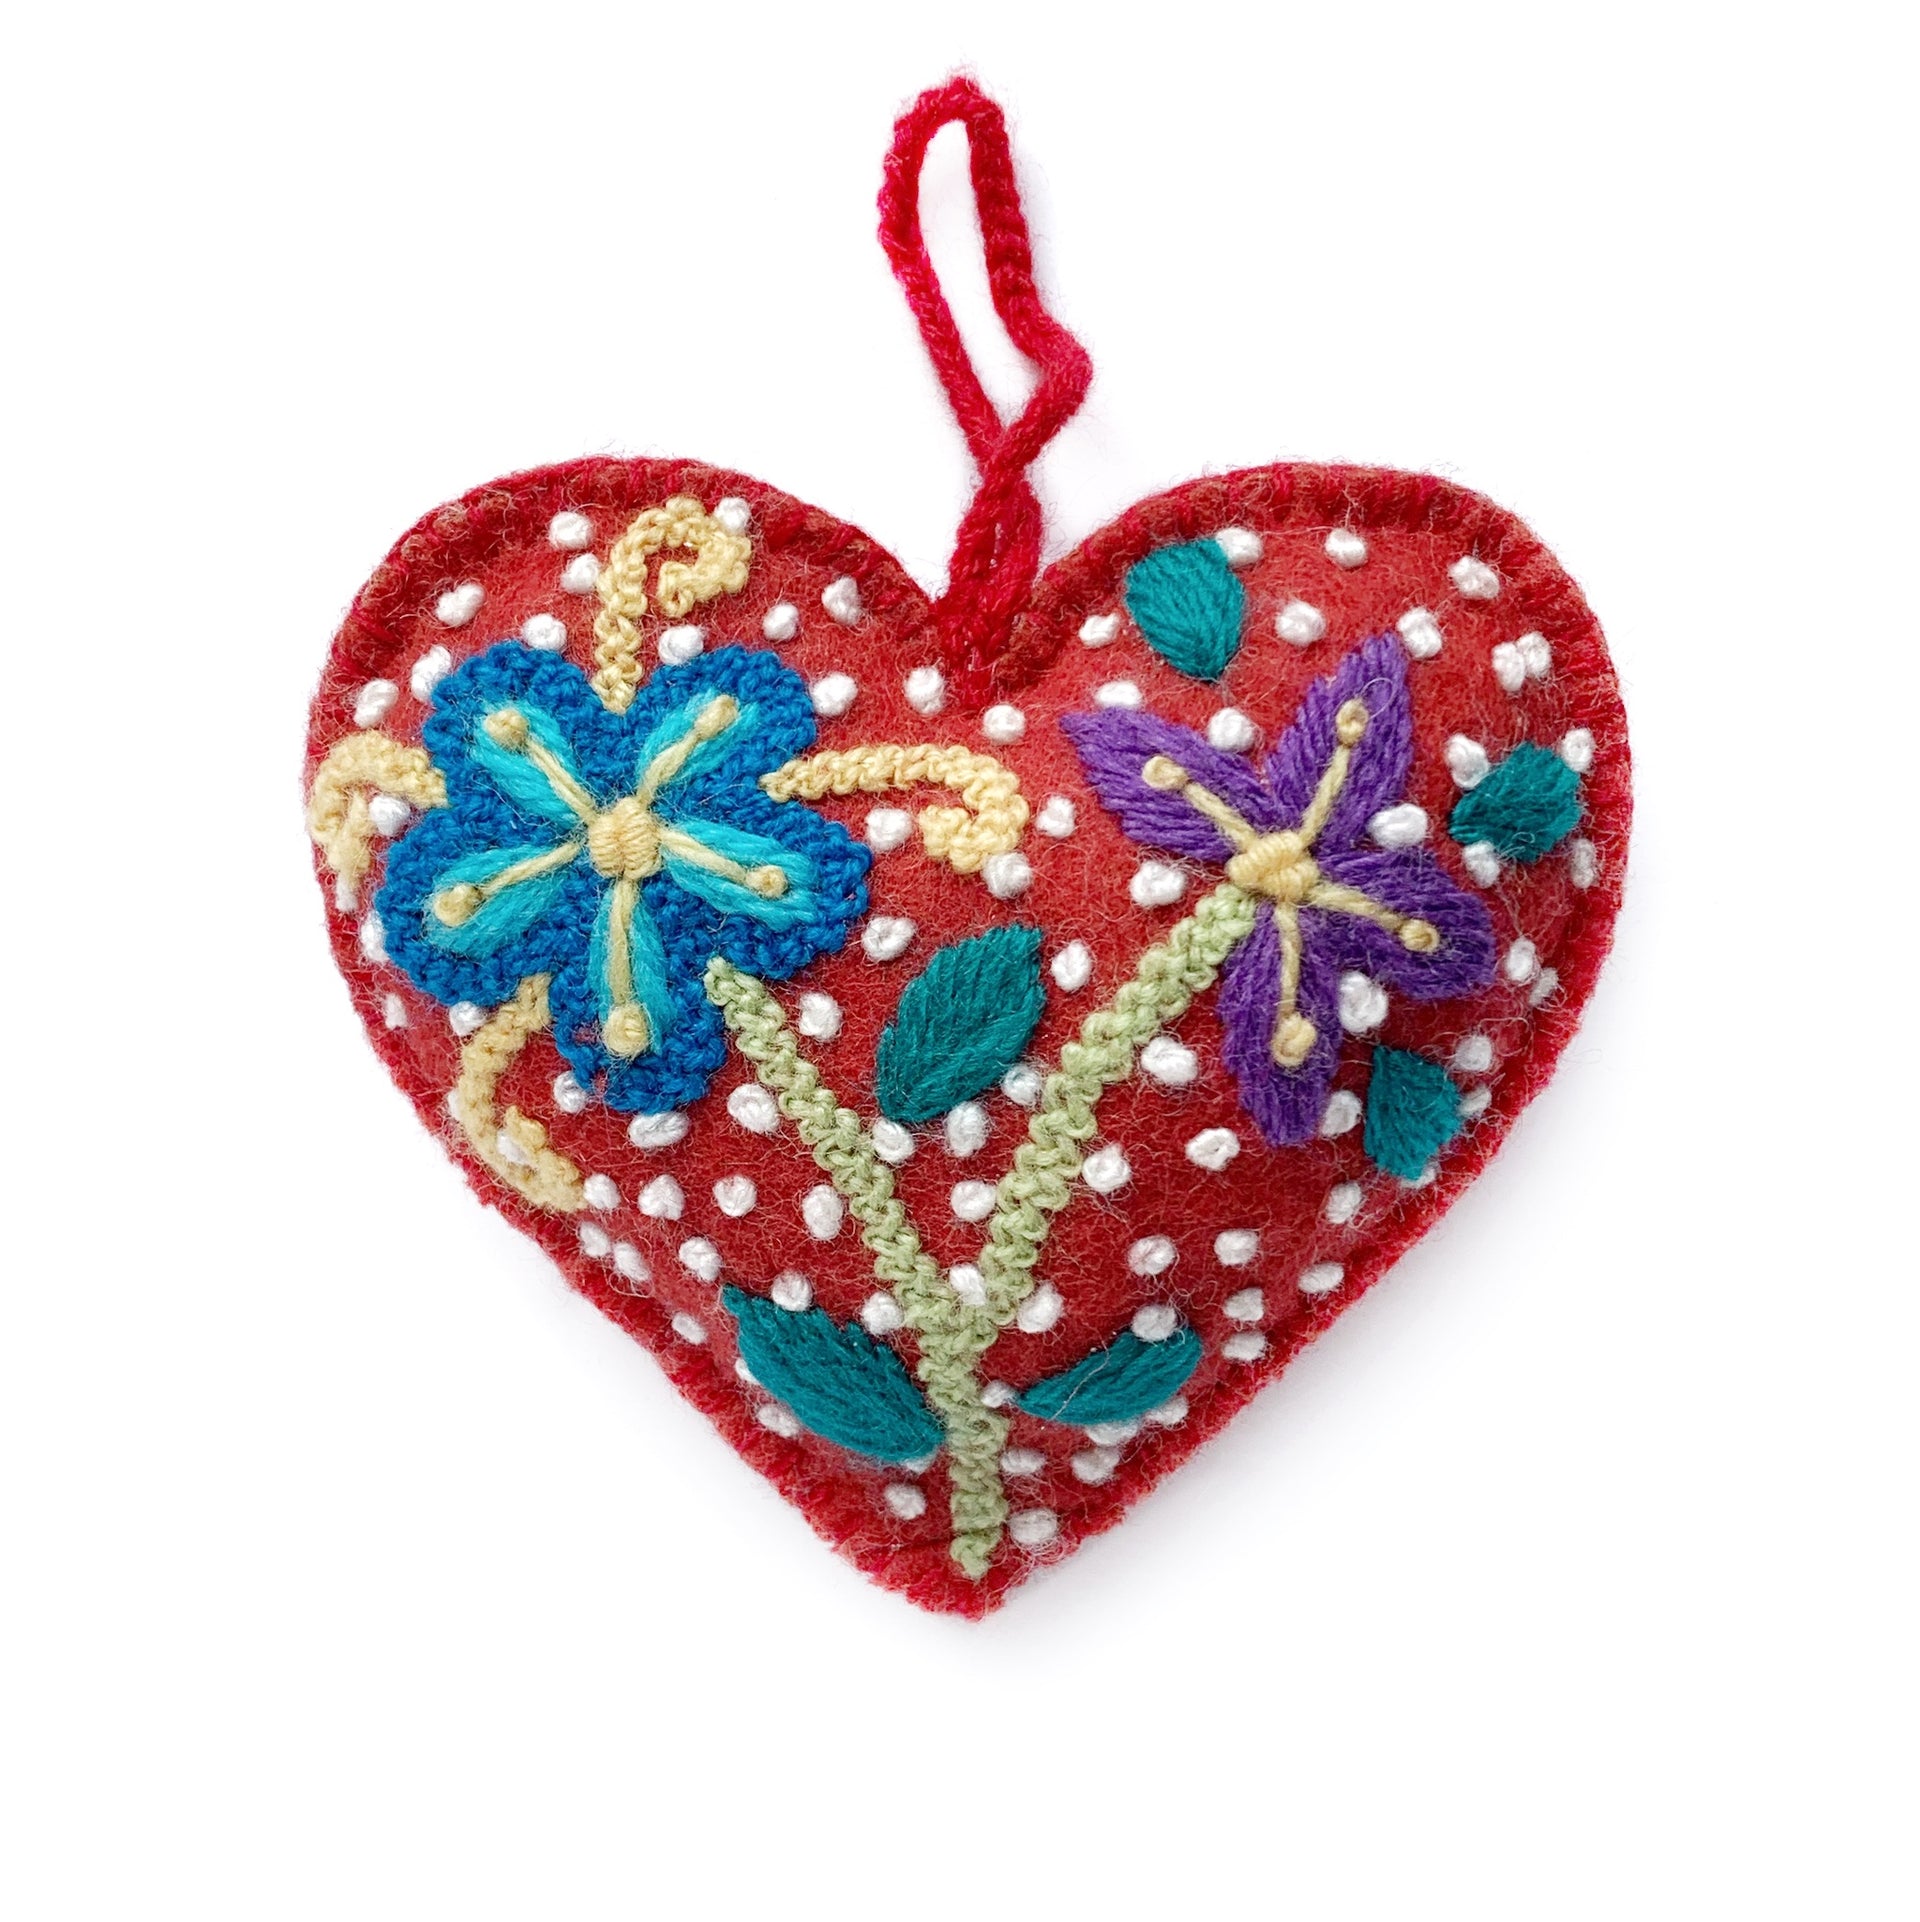 Colorful Red Heart Christmas Ornament Fair Trade